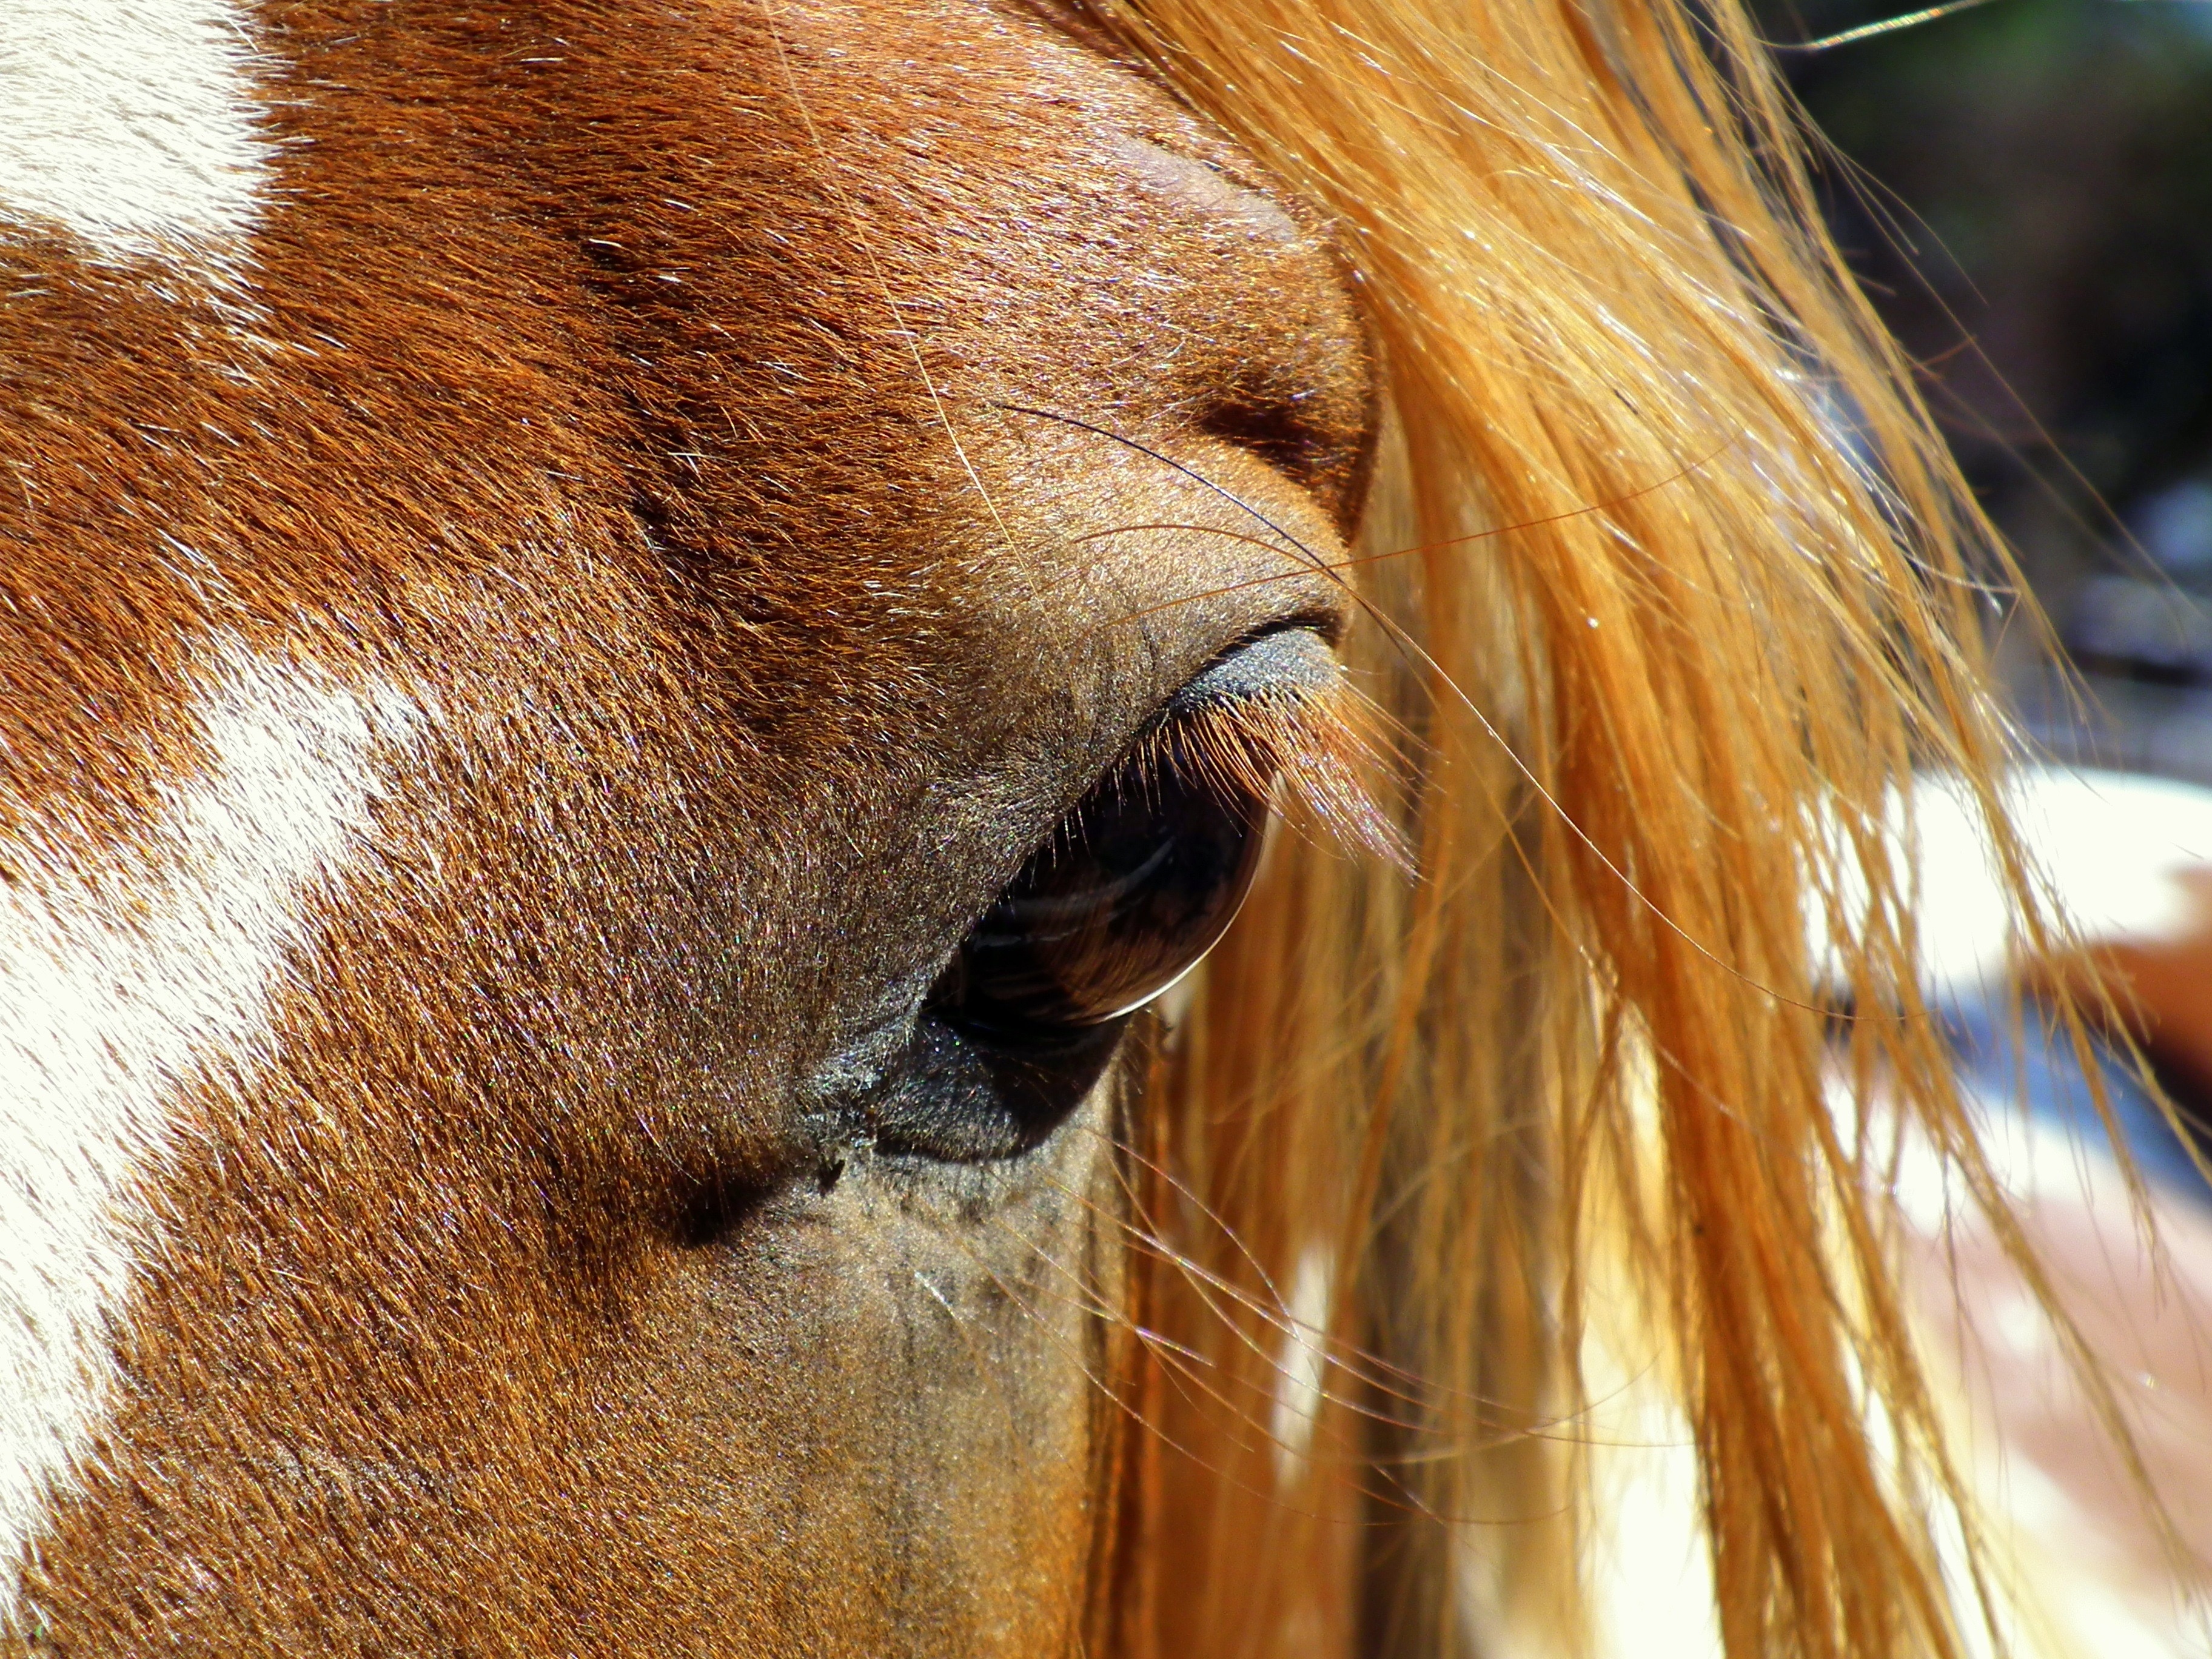 Face, Eye, Close-Up, Head, Horse, Mare, one animal, animal themes